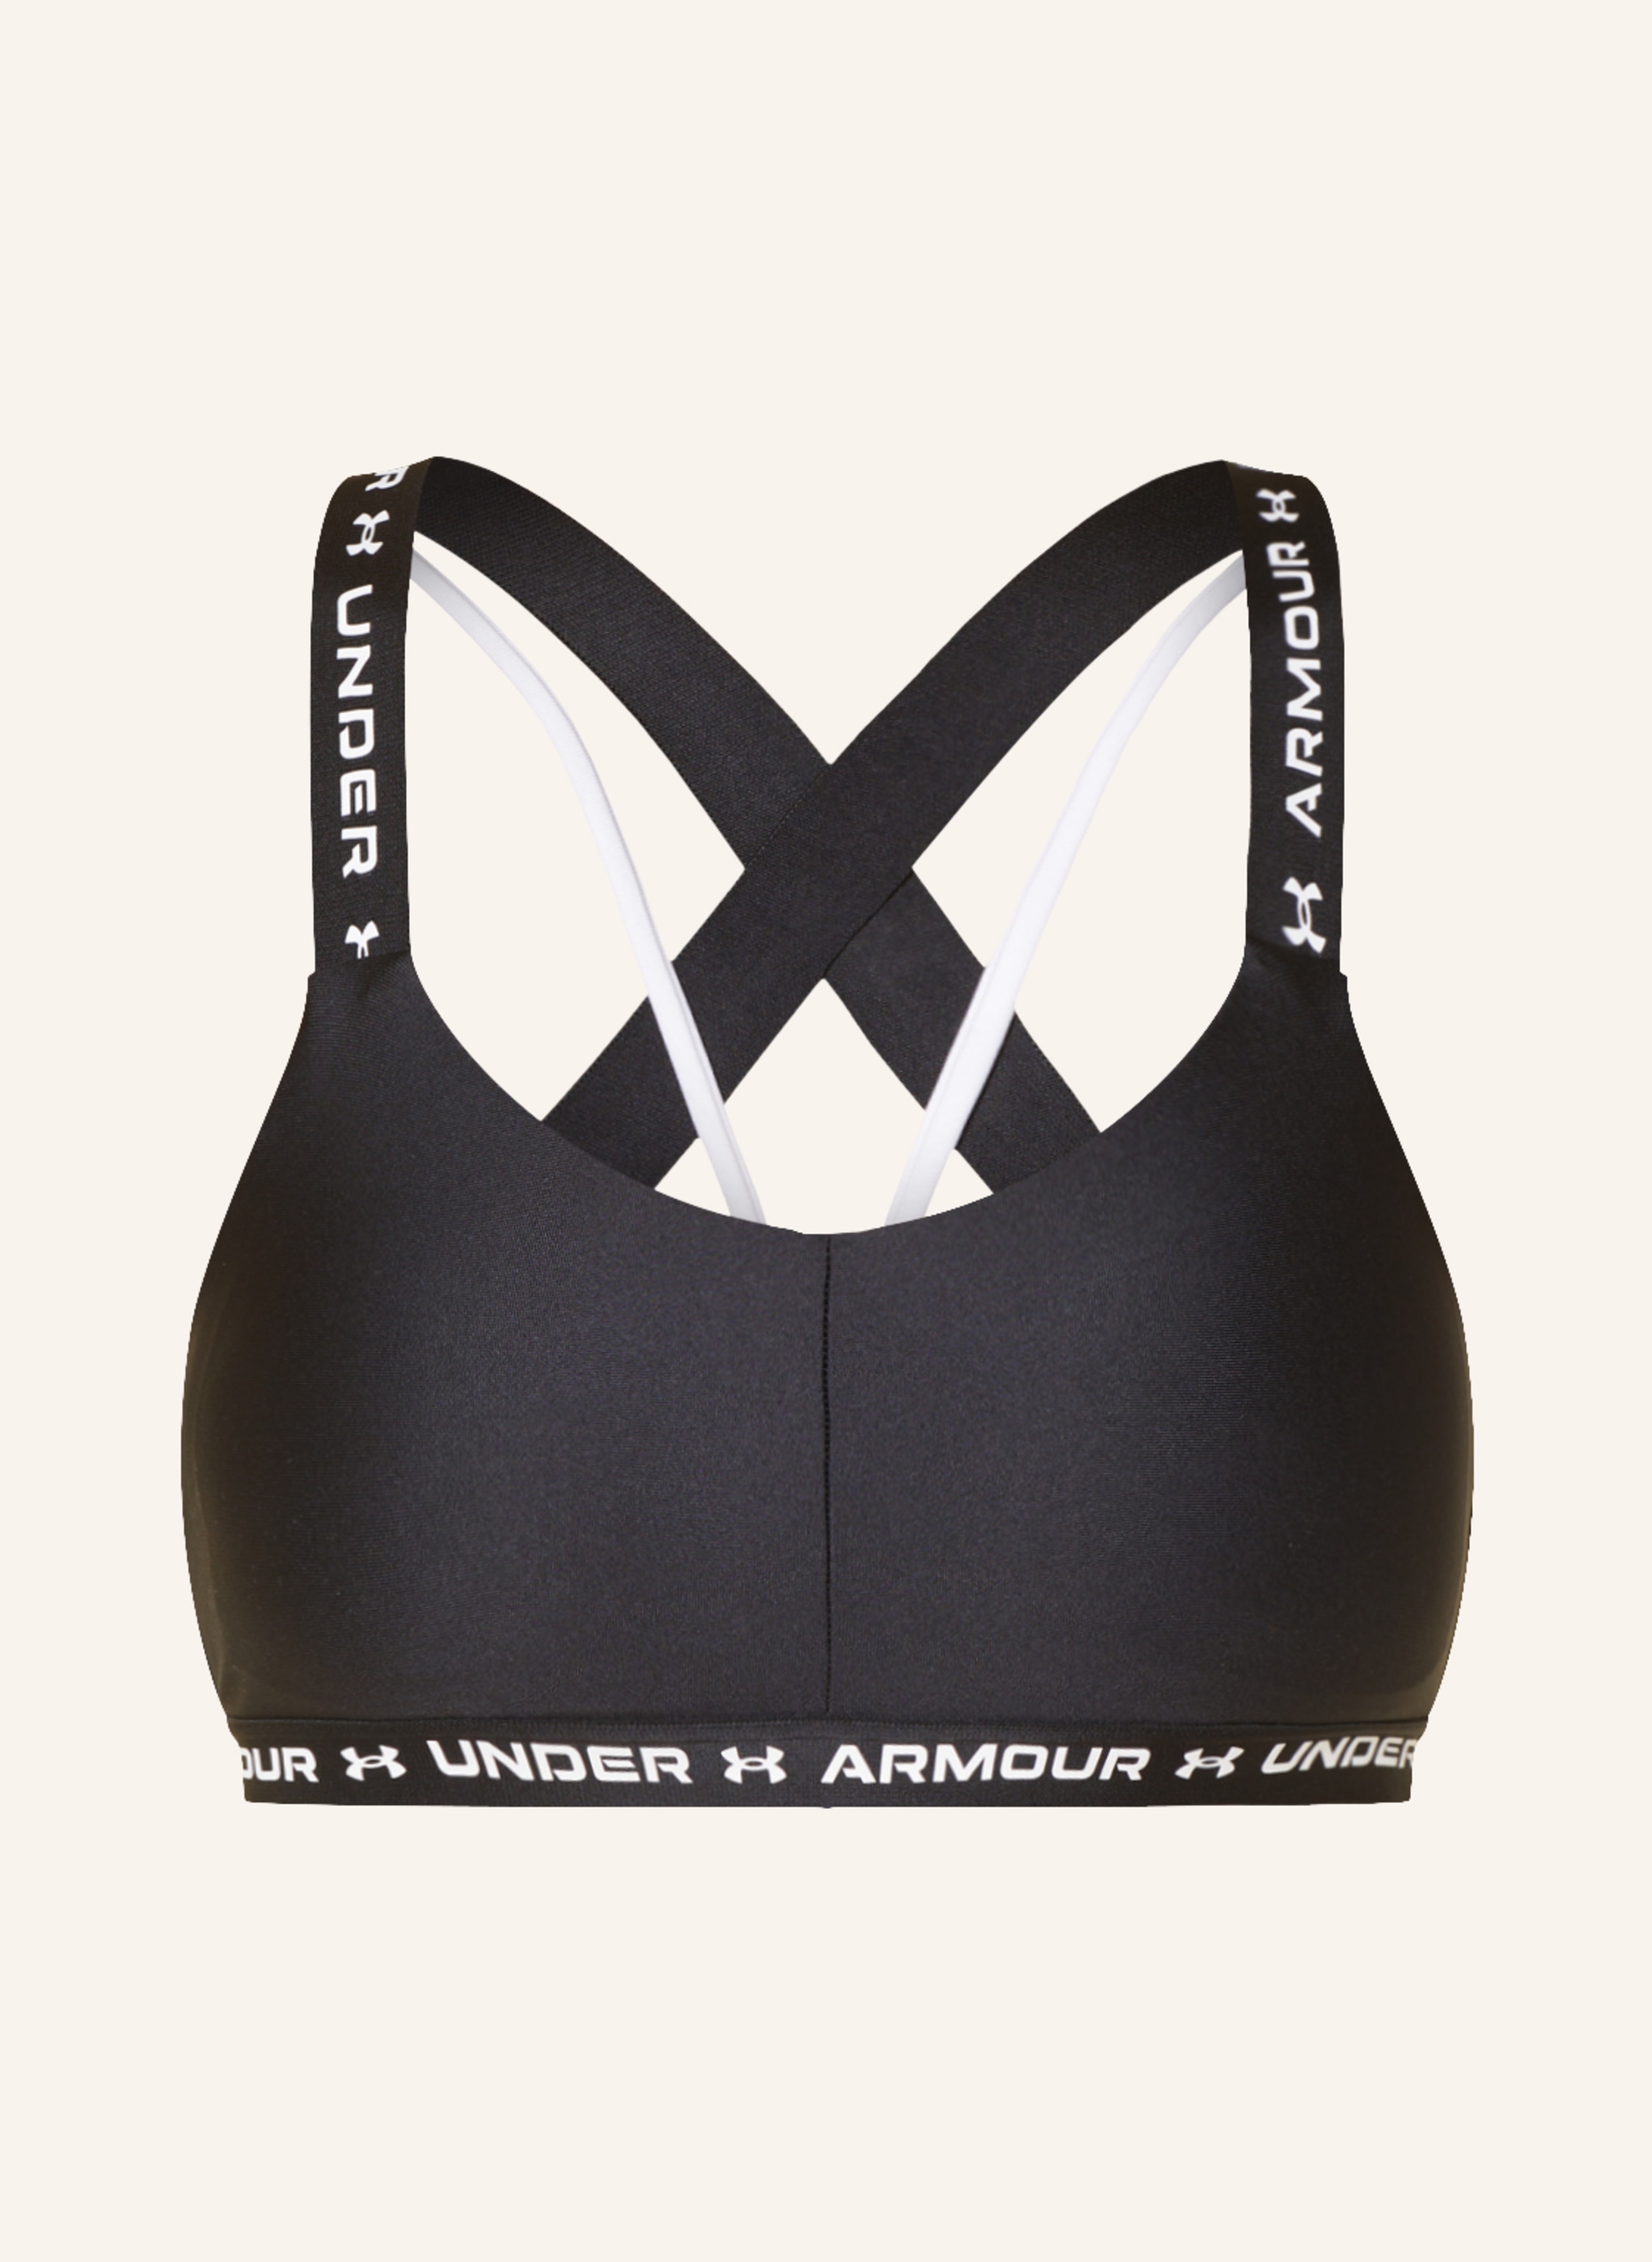 Under Armour Armour Crossback Low Impact Sports Bra Dusty Pink, £6.00